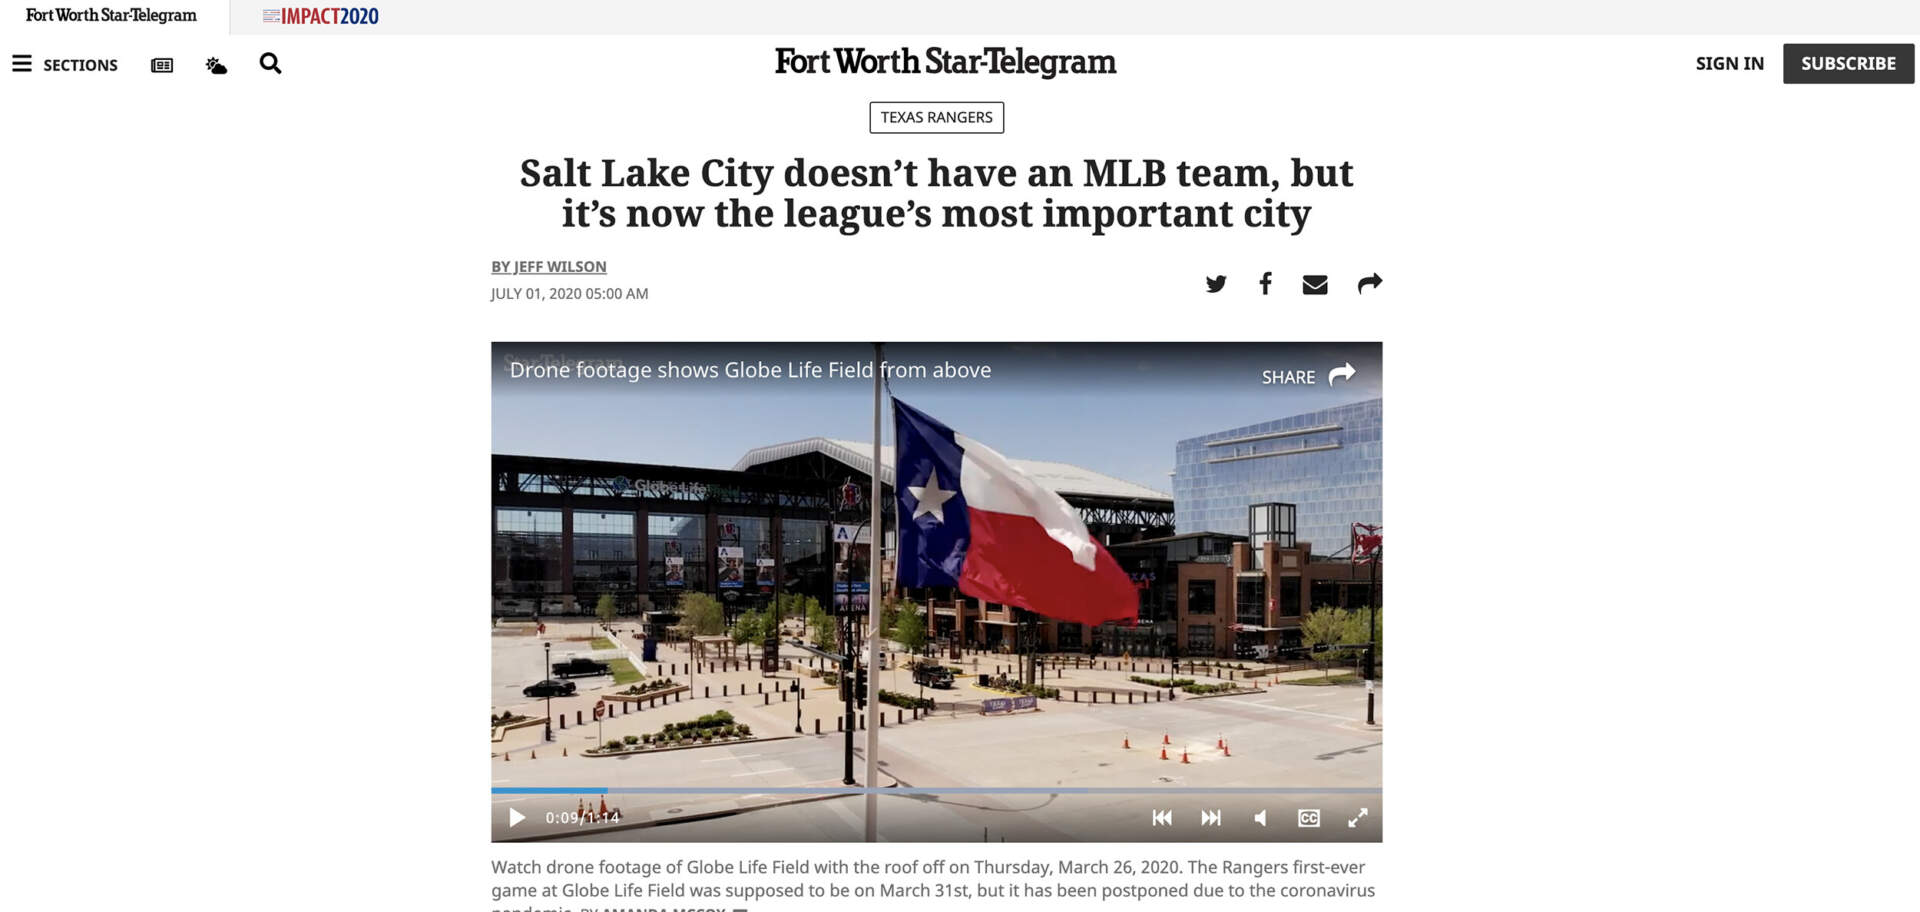 Salt Lake City doesn’t have an MLB team, but it’s now the league’s most important city